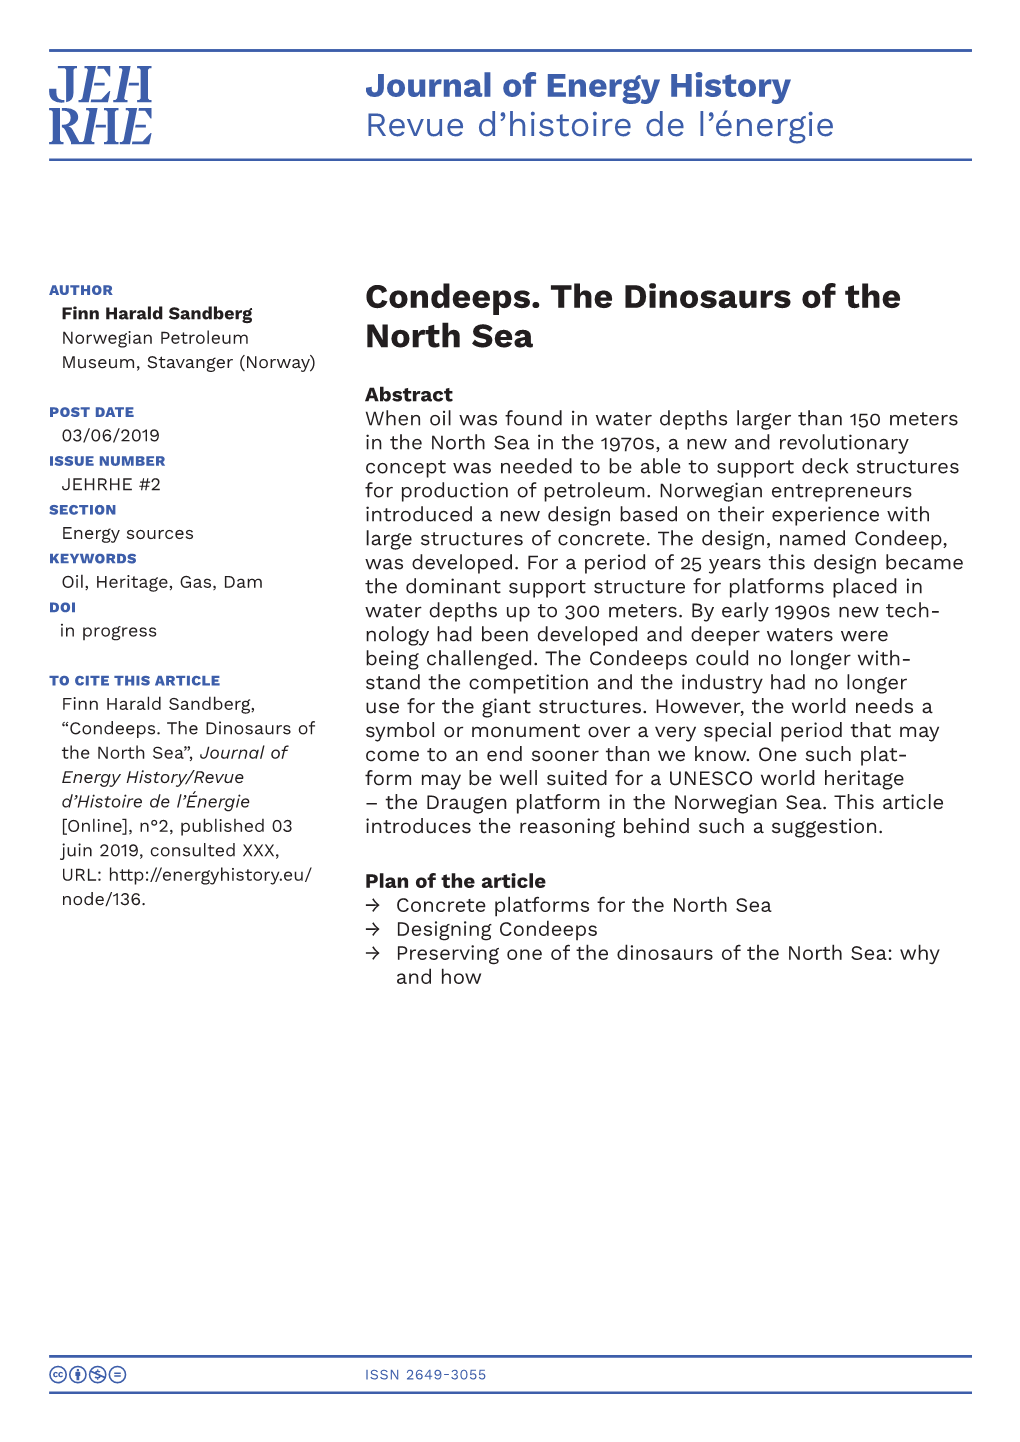 Condeeps. the Dinosaurs of the North Sea